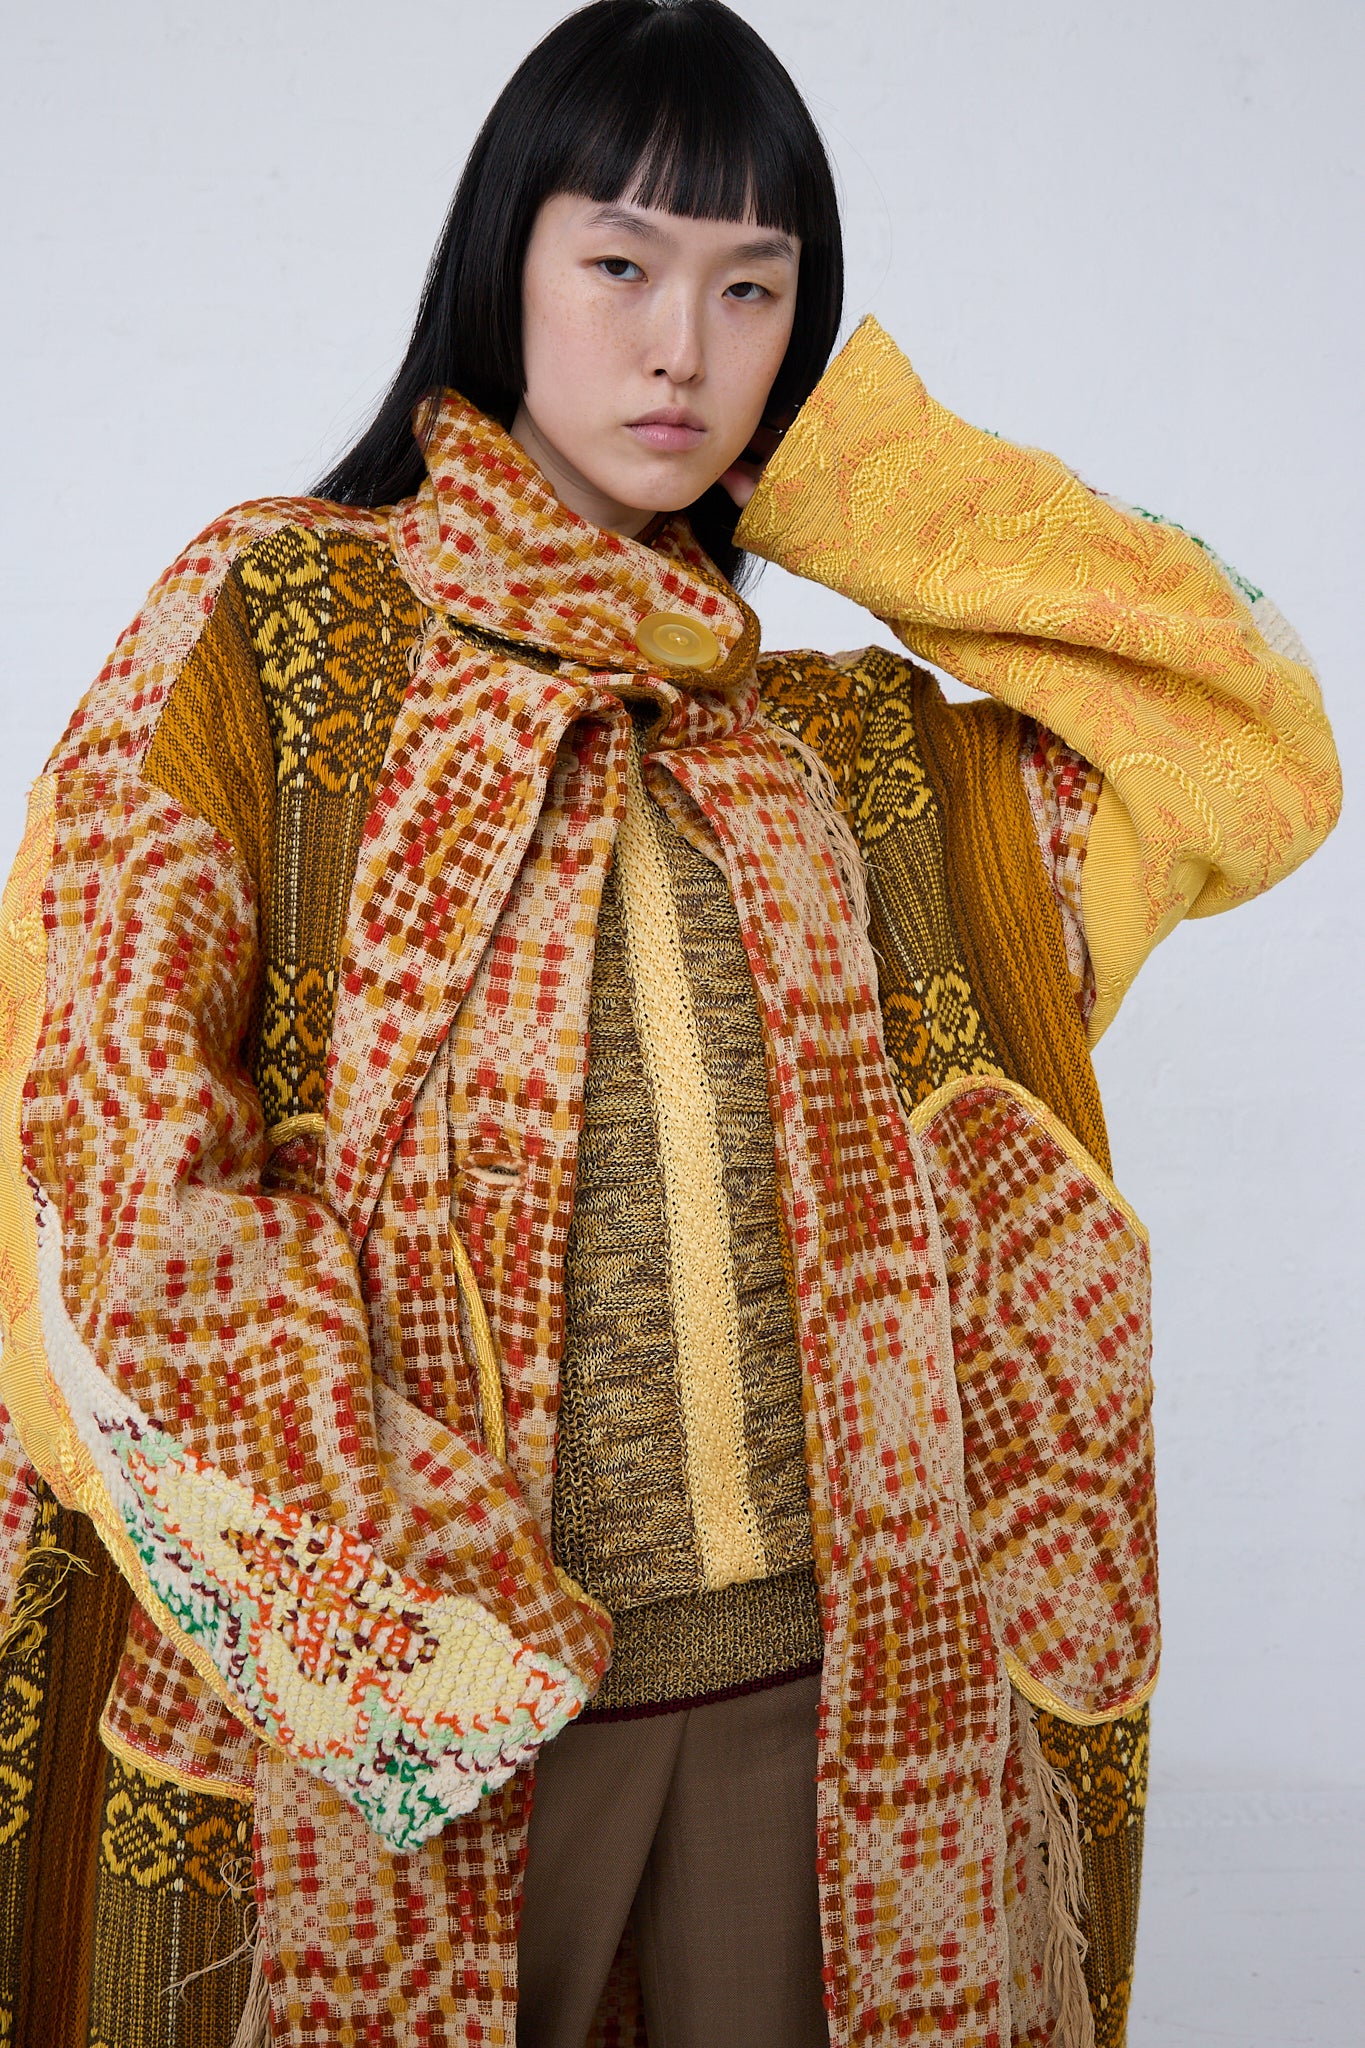 A woman in a Thank You Have A Good Day Patchwork Blanket Scarf Parka in Red, Yellow and Brown, posing for a photo.